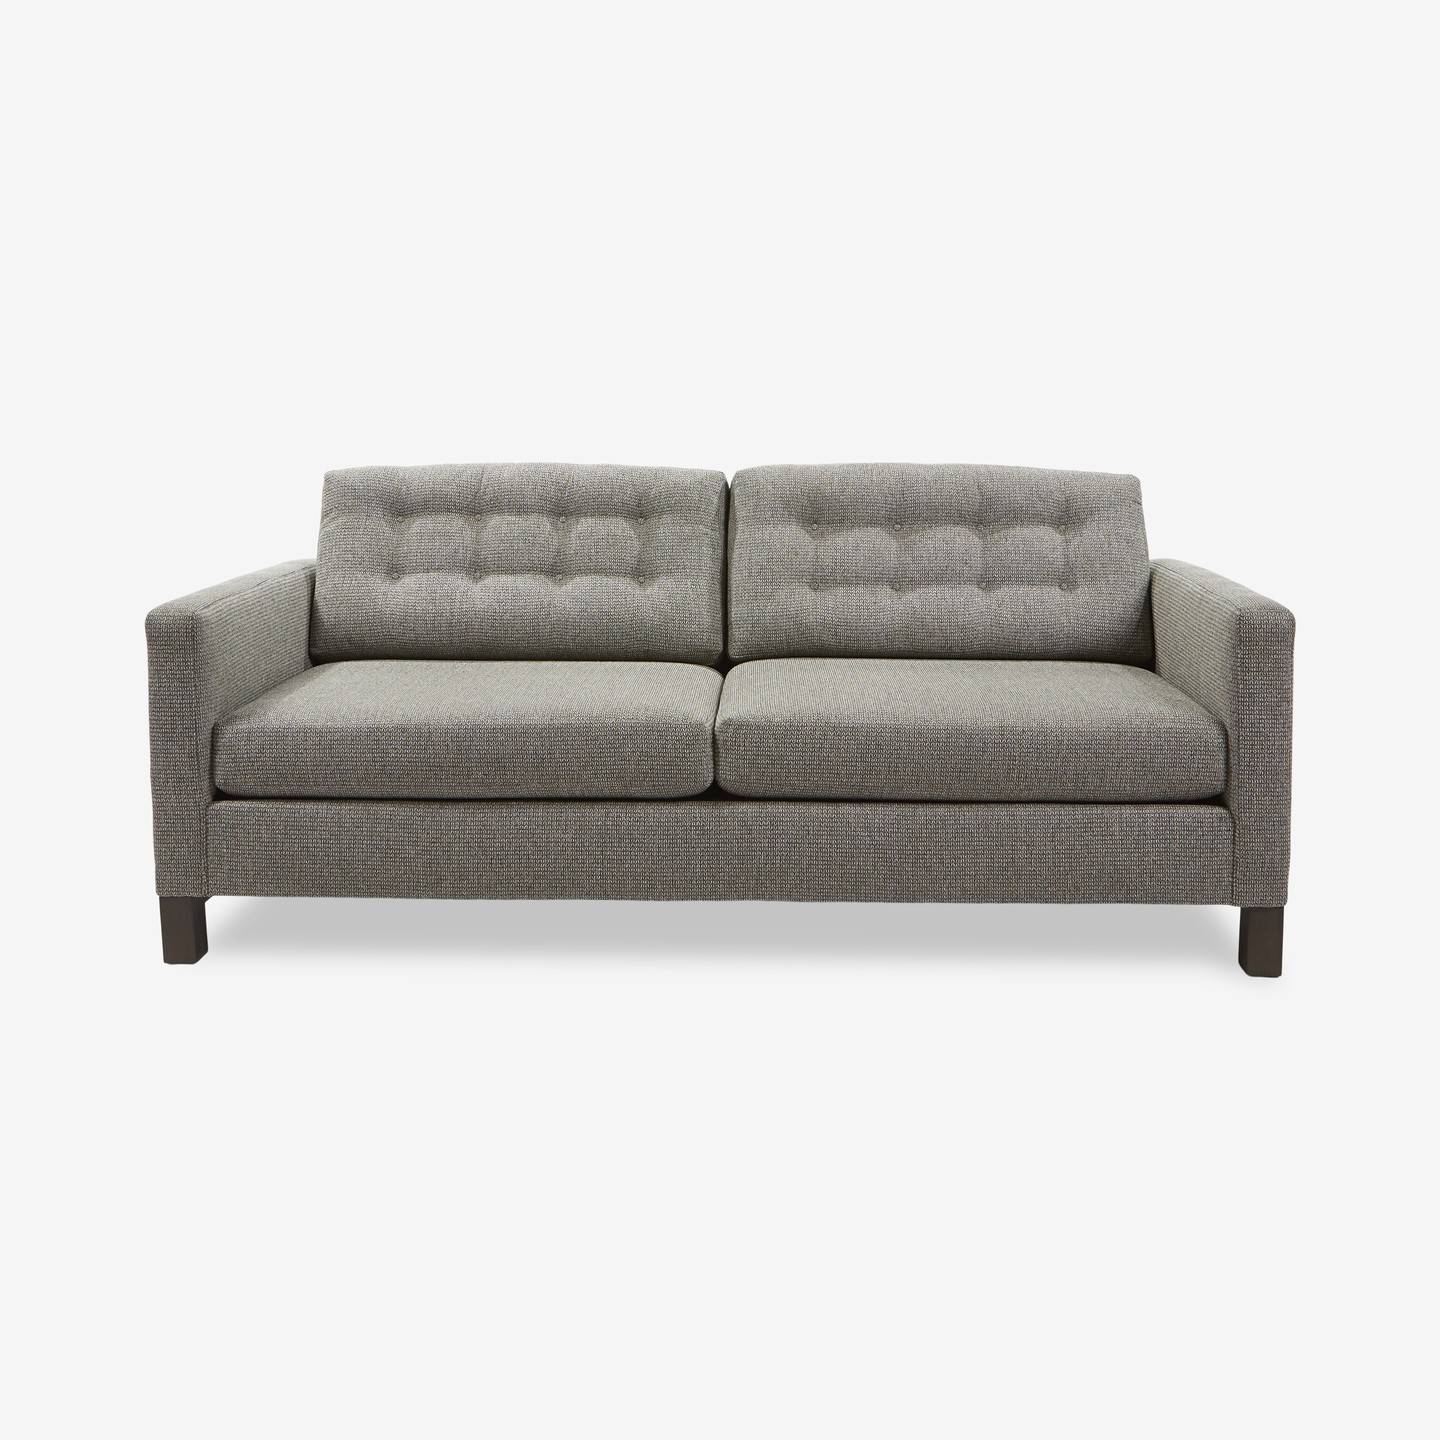 1330_Quincy-Sofa-Gray-Tufted_Front_2021